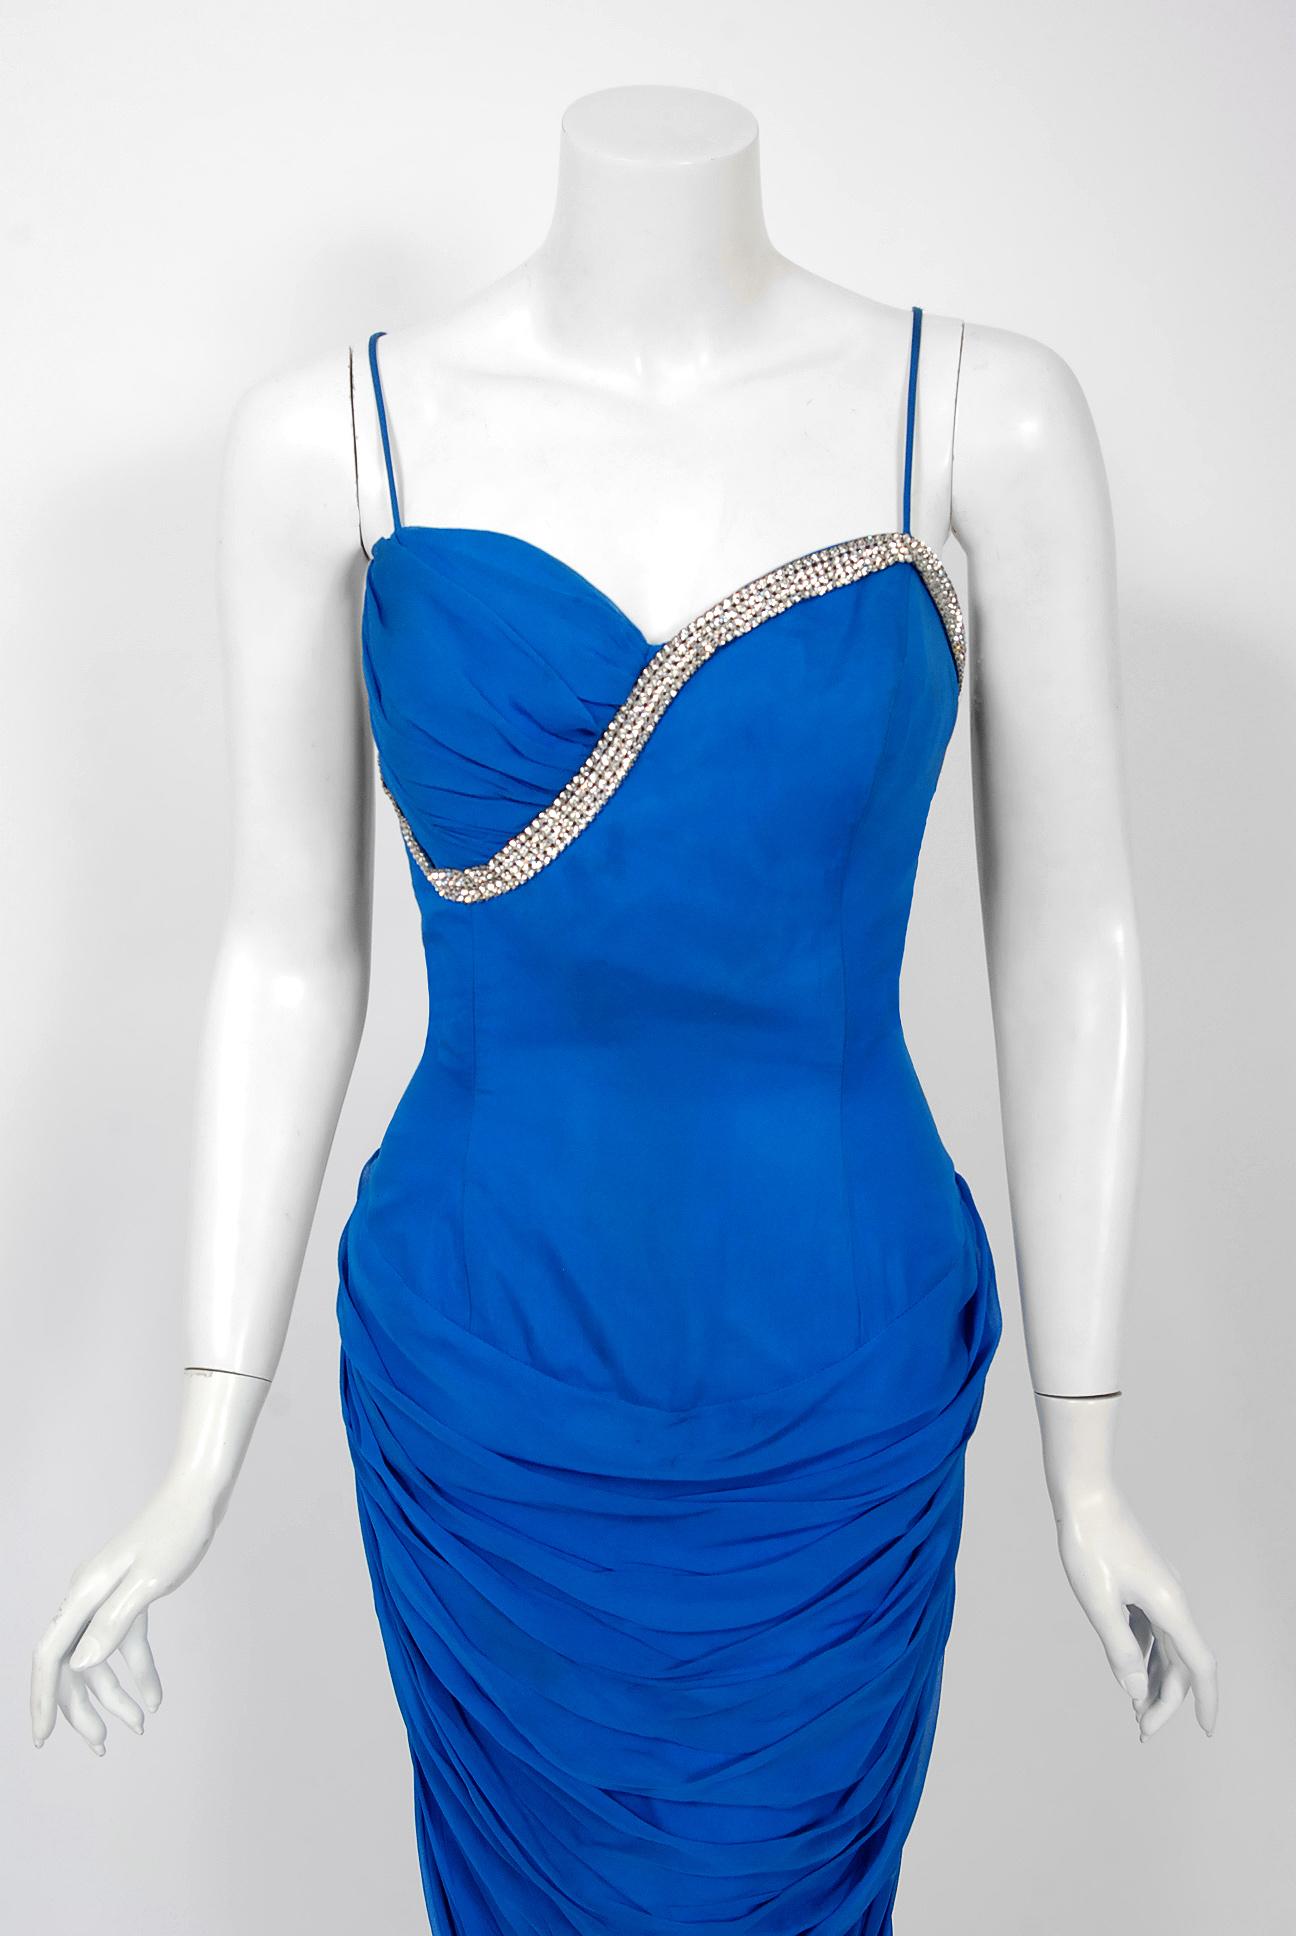 A seductive and highly stylized 1950's sapphire-blue silk chiffon cocktail by the famous Lilli Diamond. The silhouette is classic pin-up 